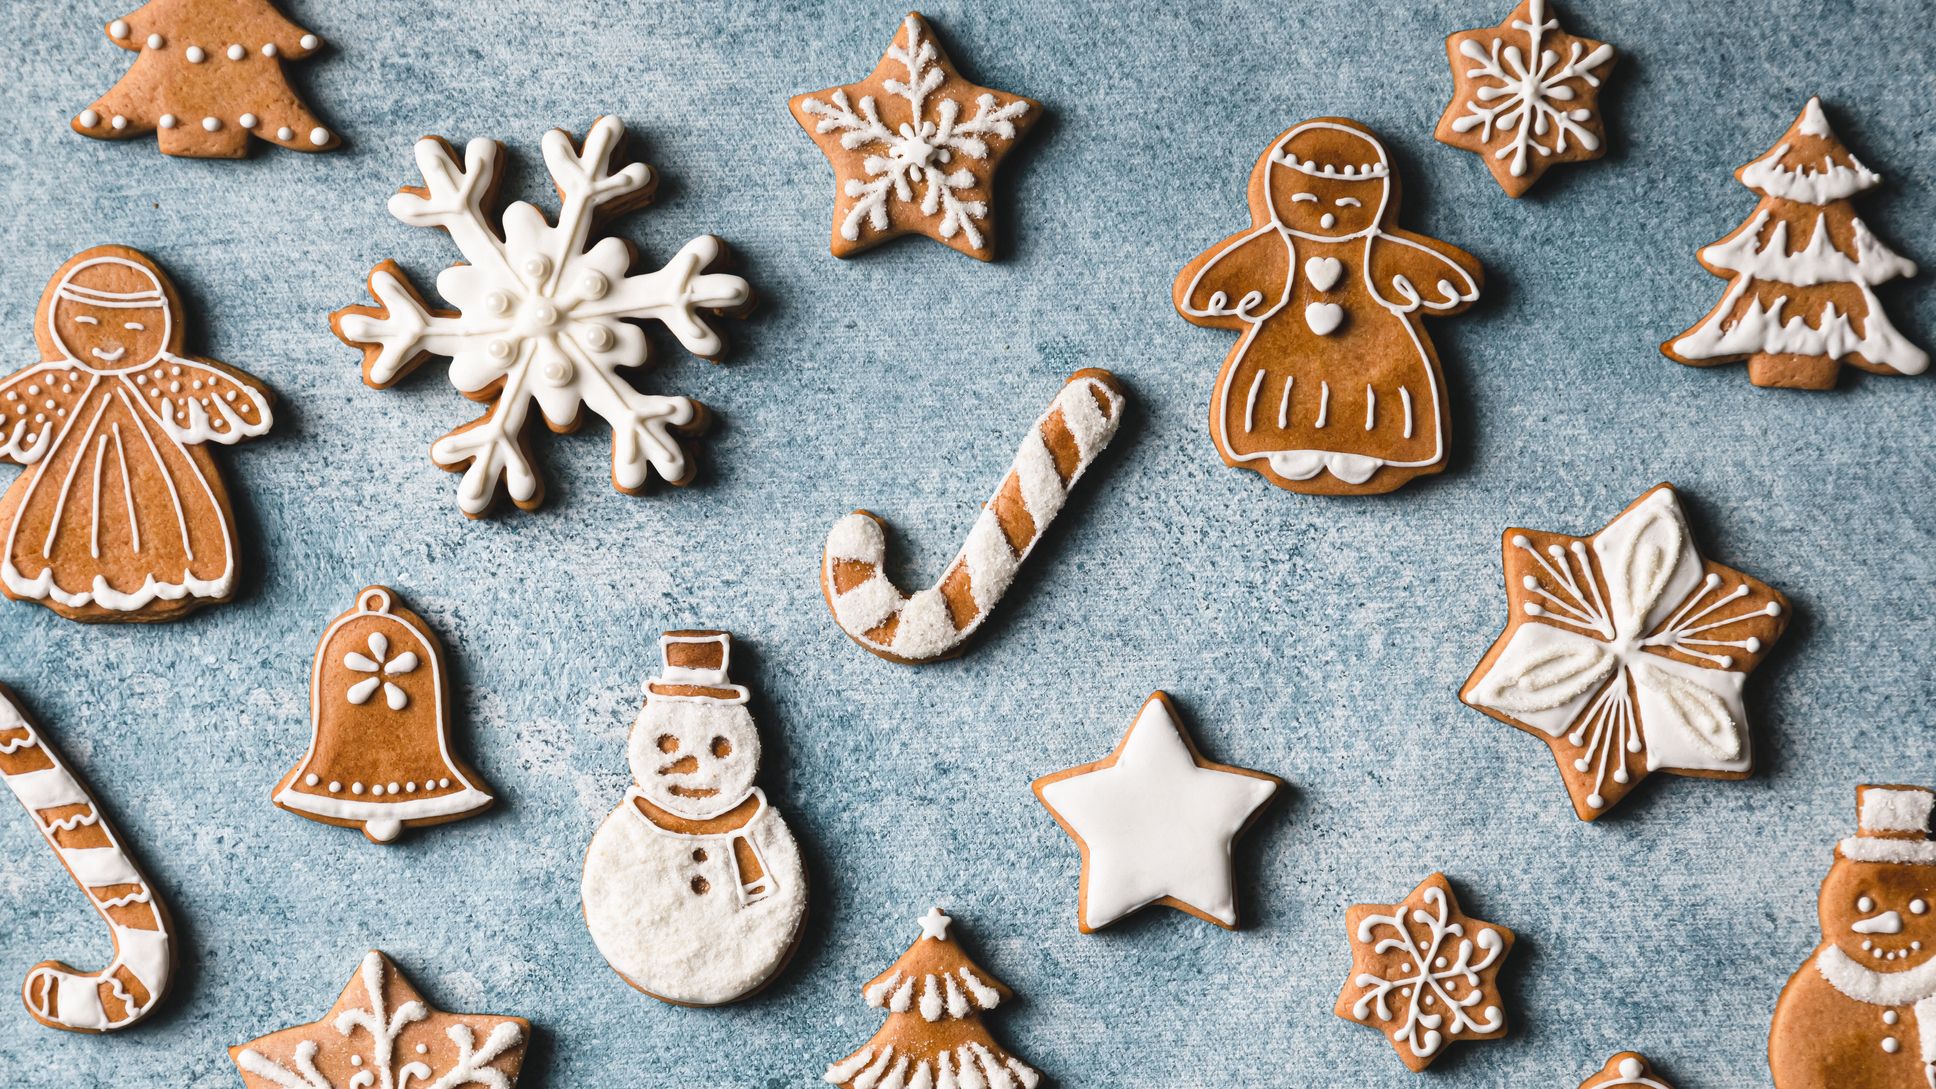 Baked star-shaped gingerbread cookies powdered with sugar for